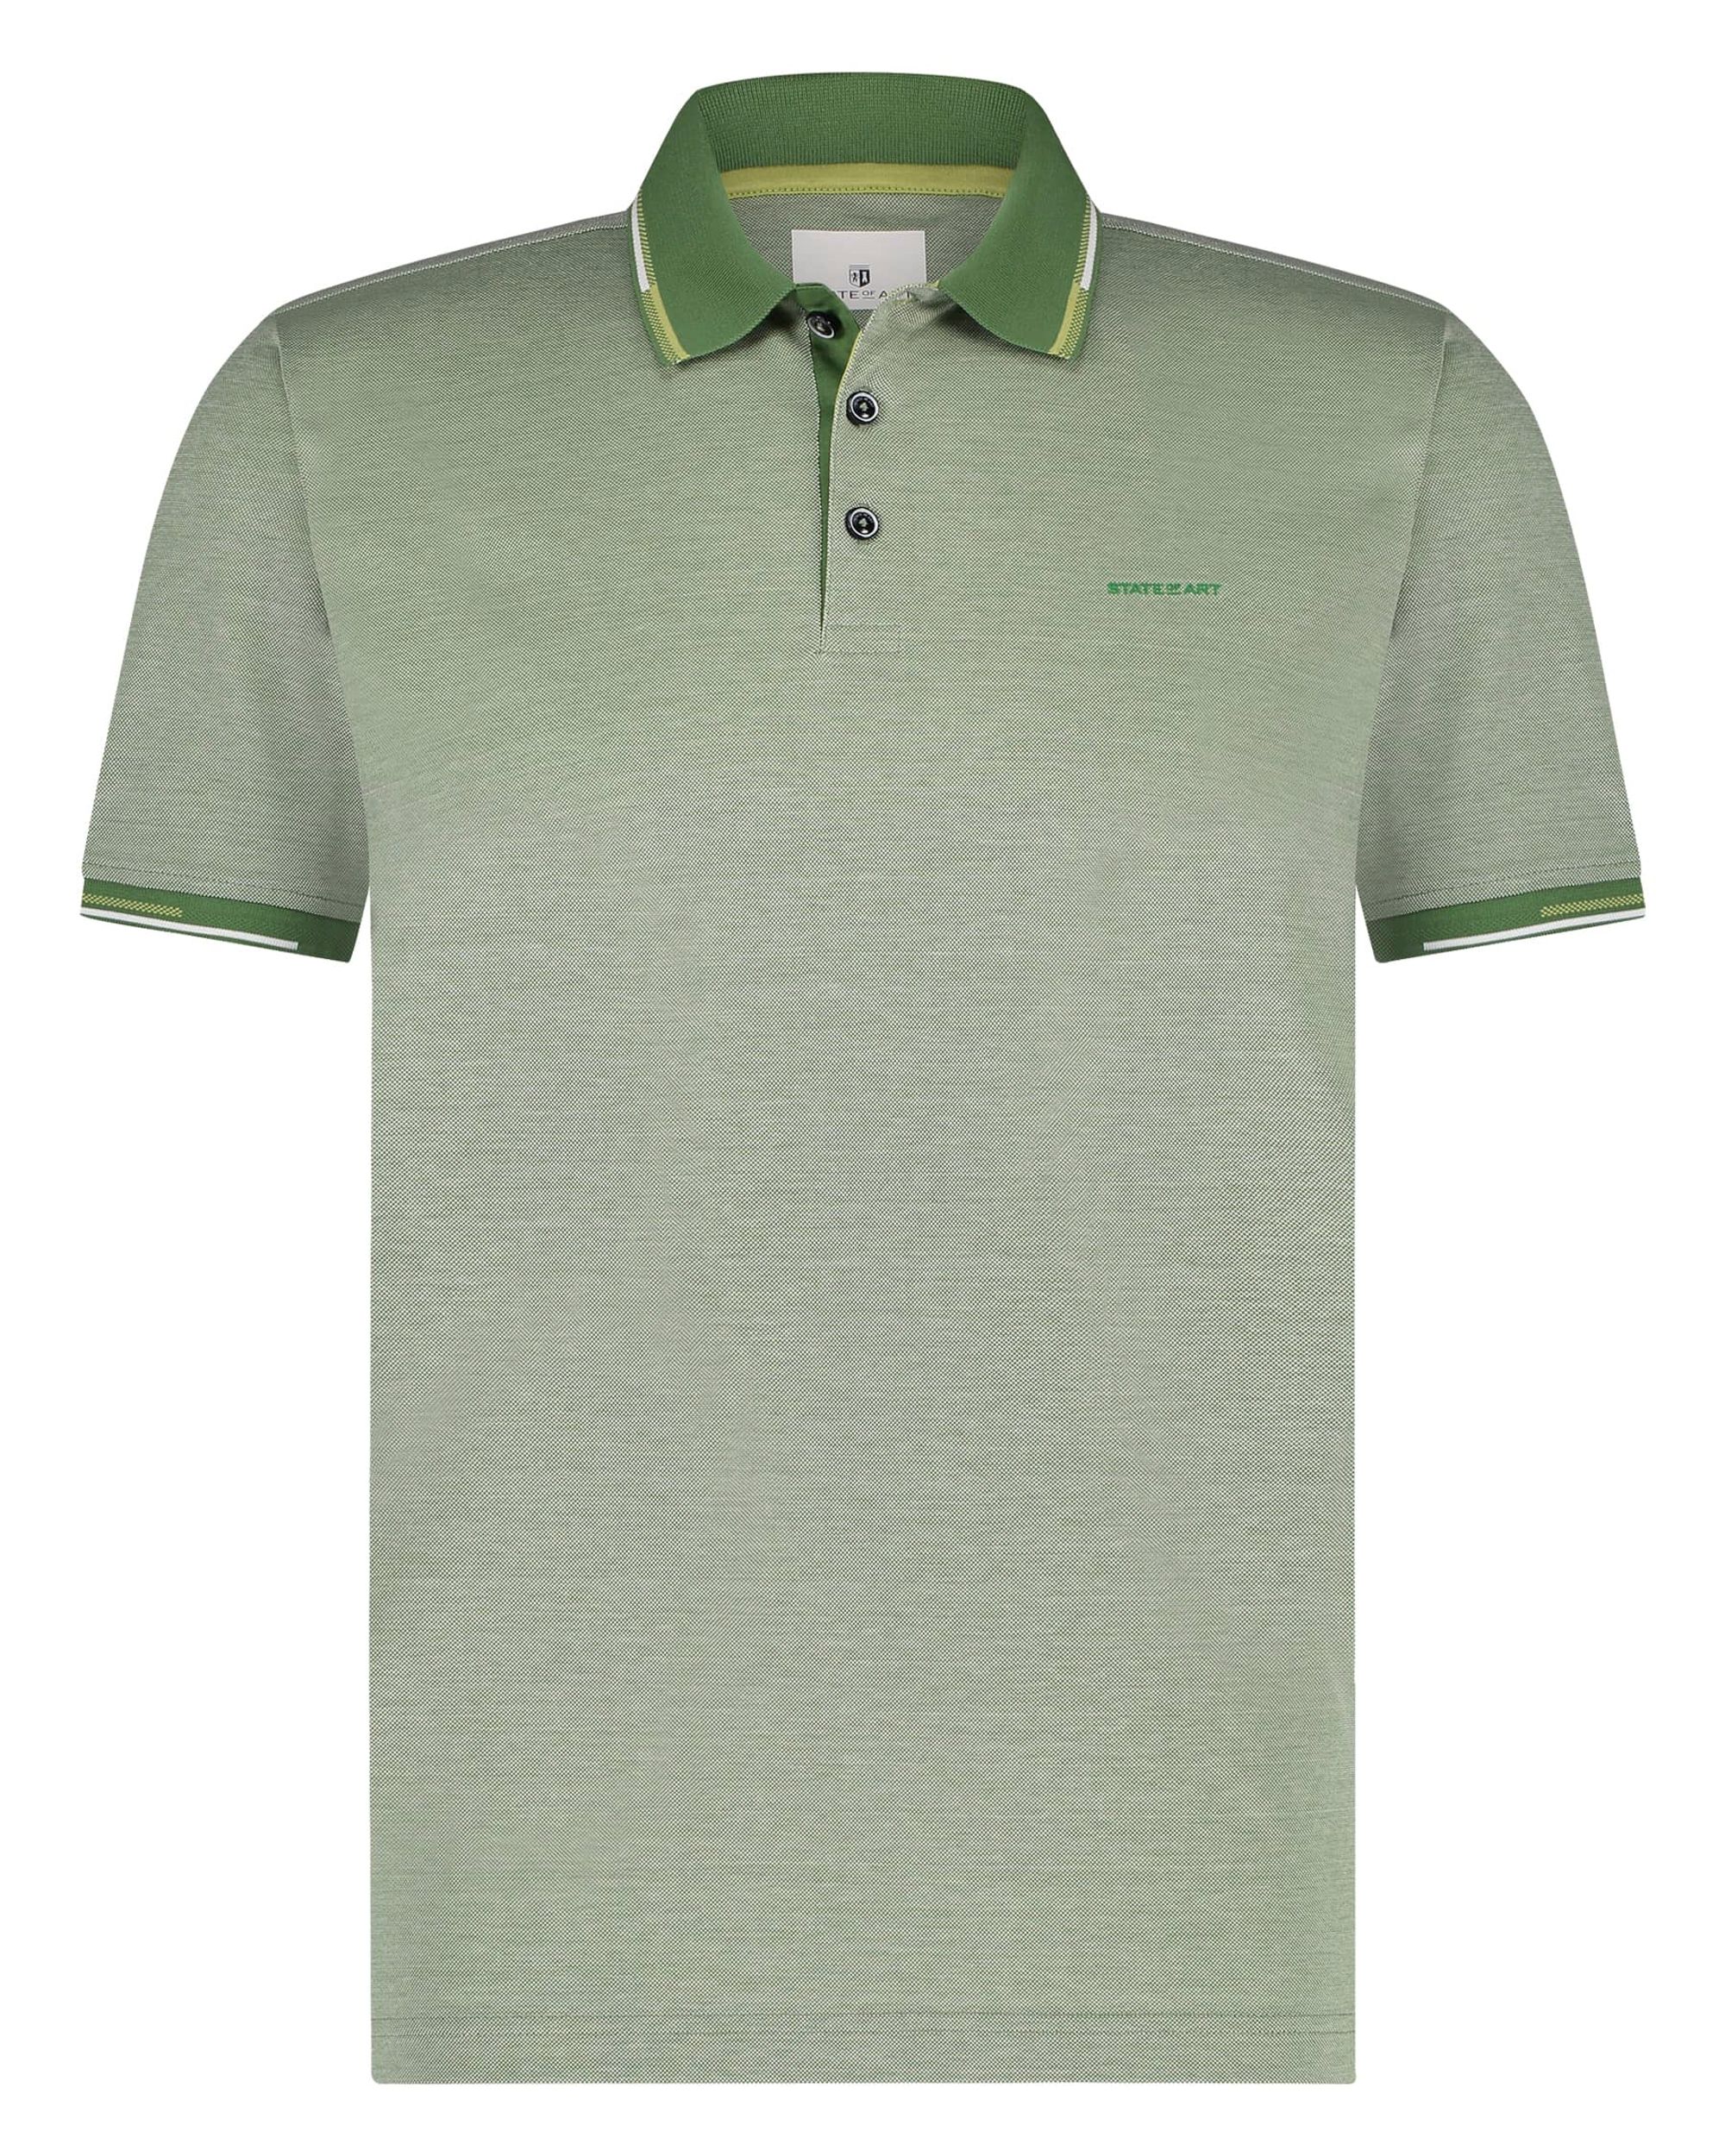 State of Art Polo KM Groen dessin 093412-002-4XL